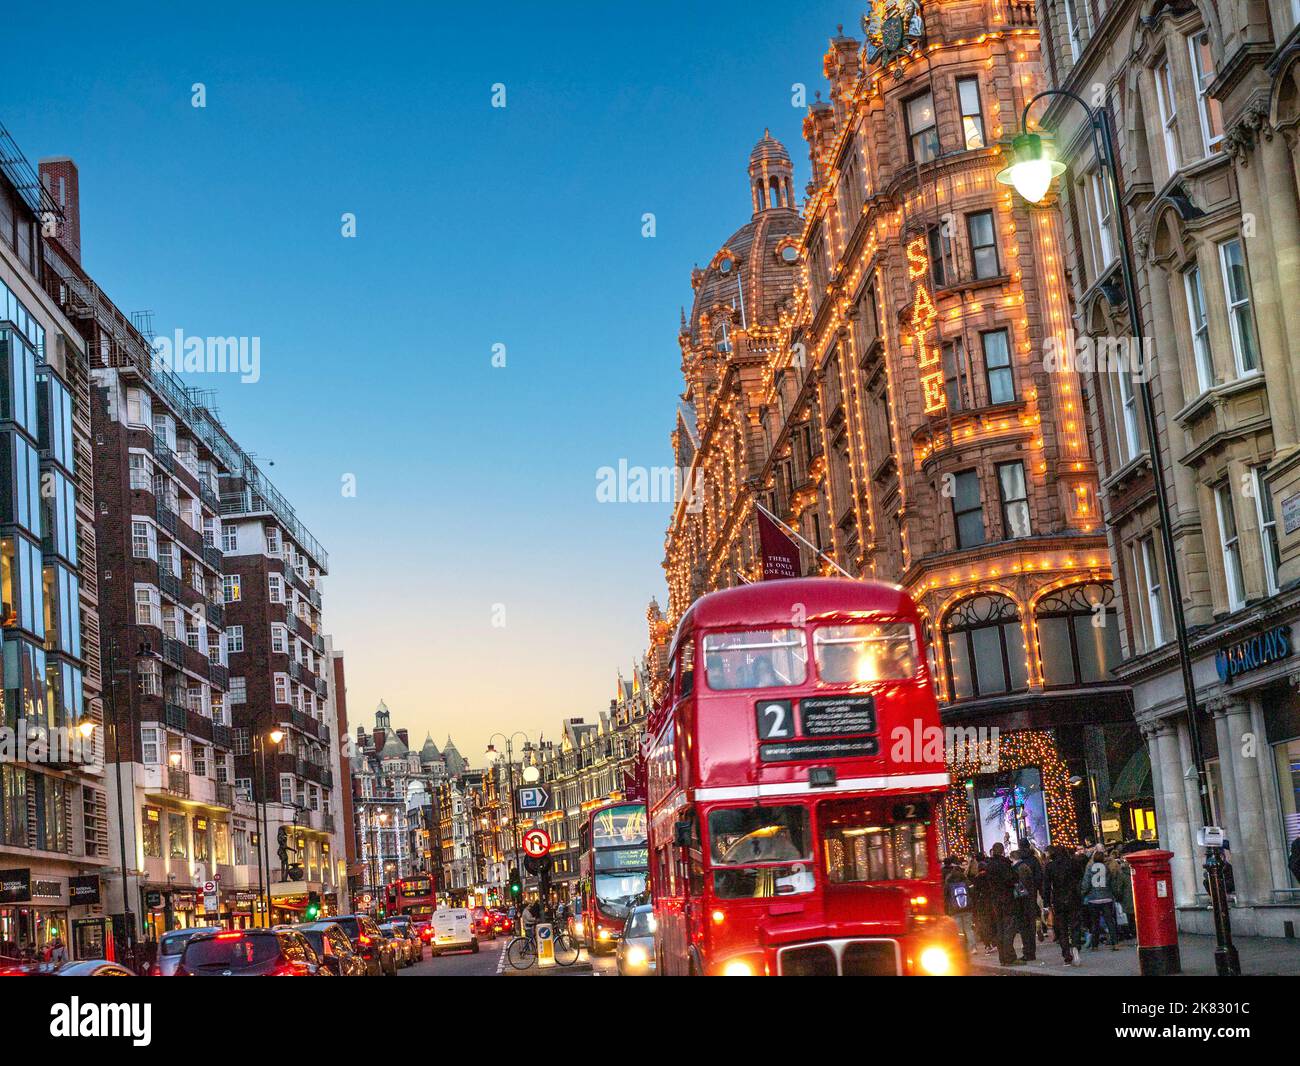 BROMPTON ROAD KNIGHTSBRIDGE WINTER SALES with vintage retro red routemaster tour bus and Harrods department store behind at dusk night with lit 'Sale' sign busy shoppers traffic Harrods Knightsbridge London SW1 Stock Photo